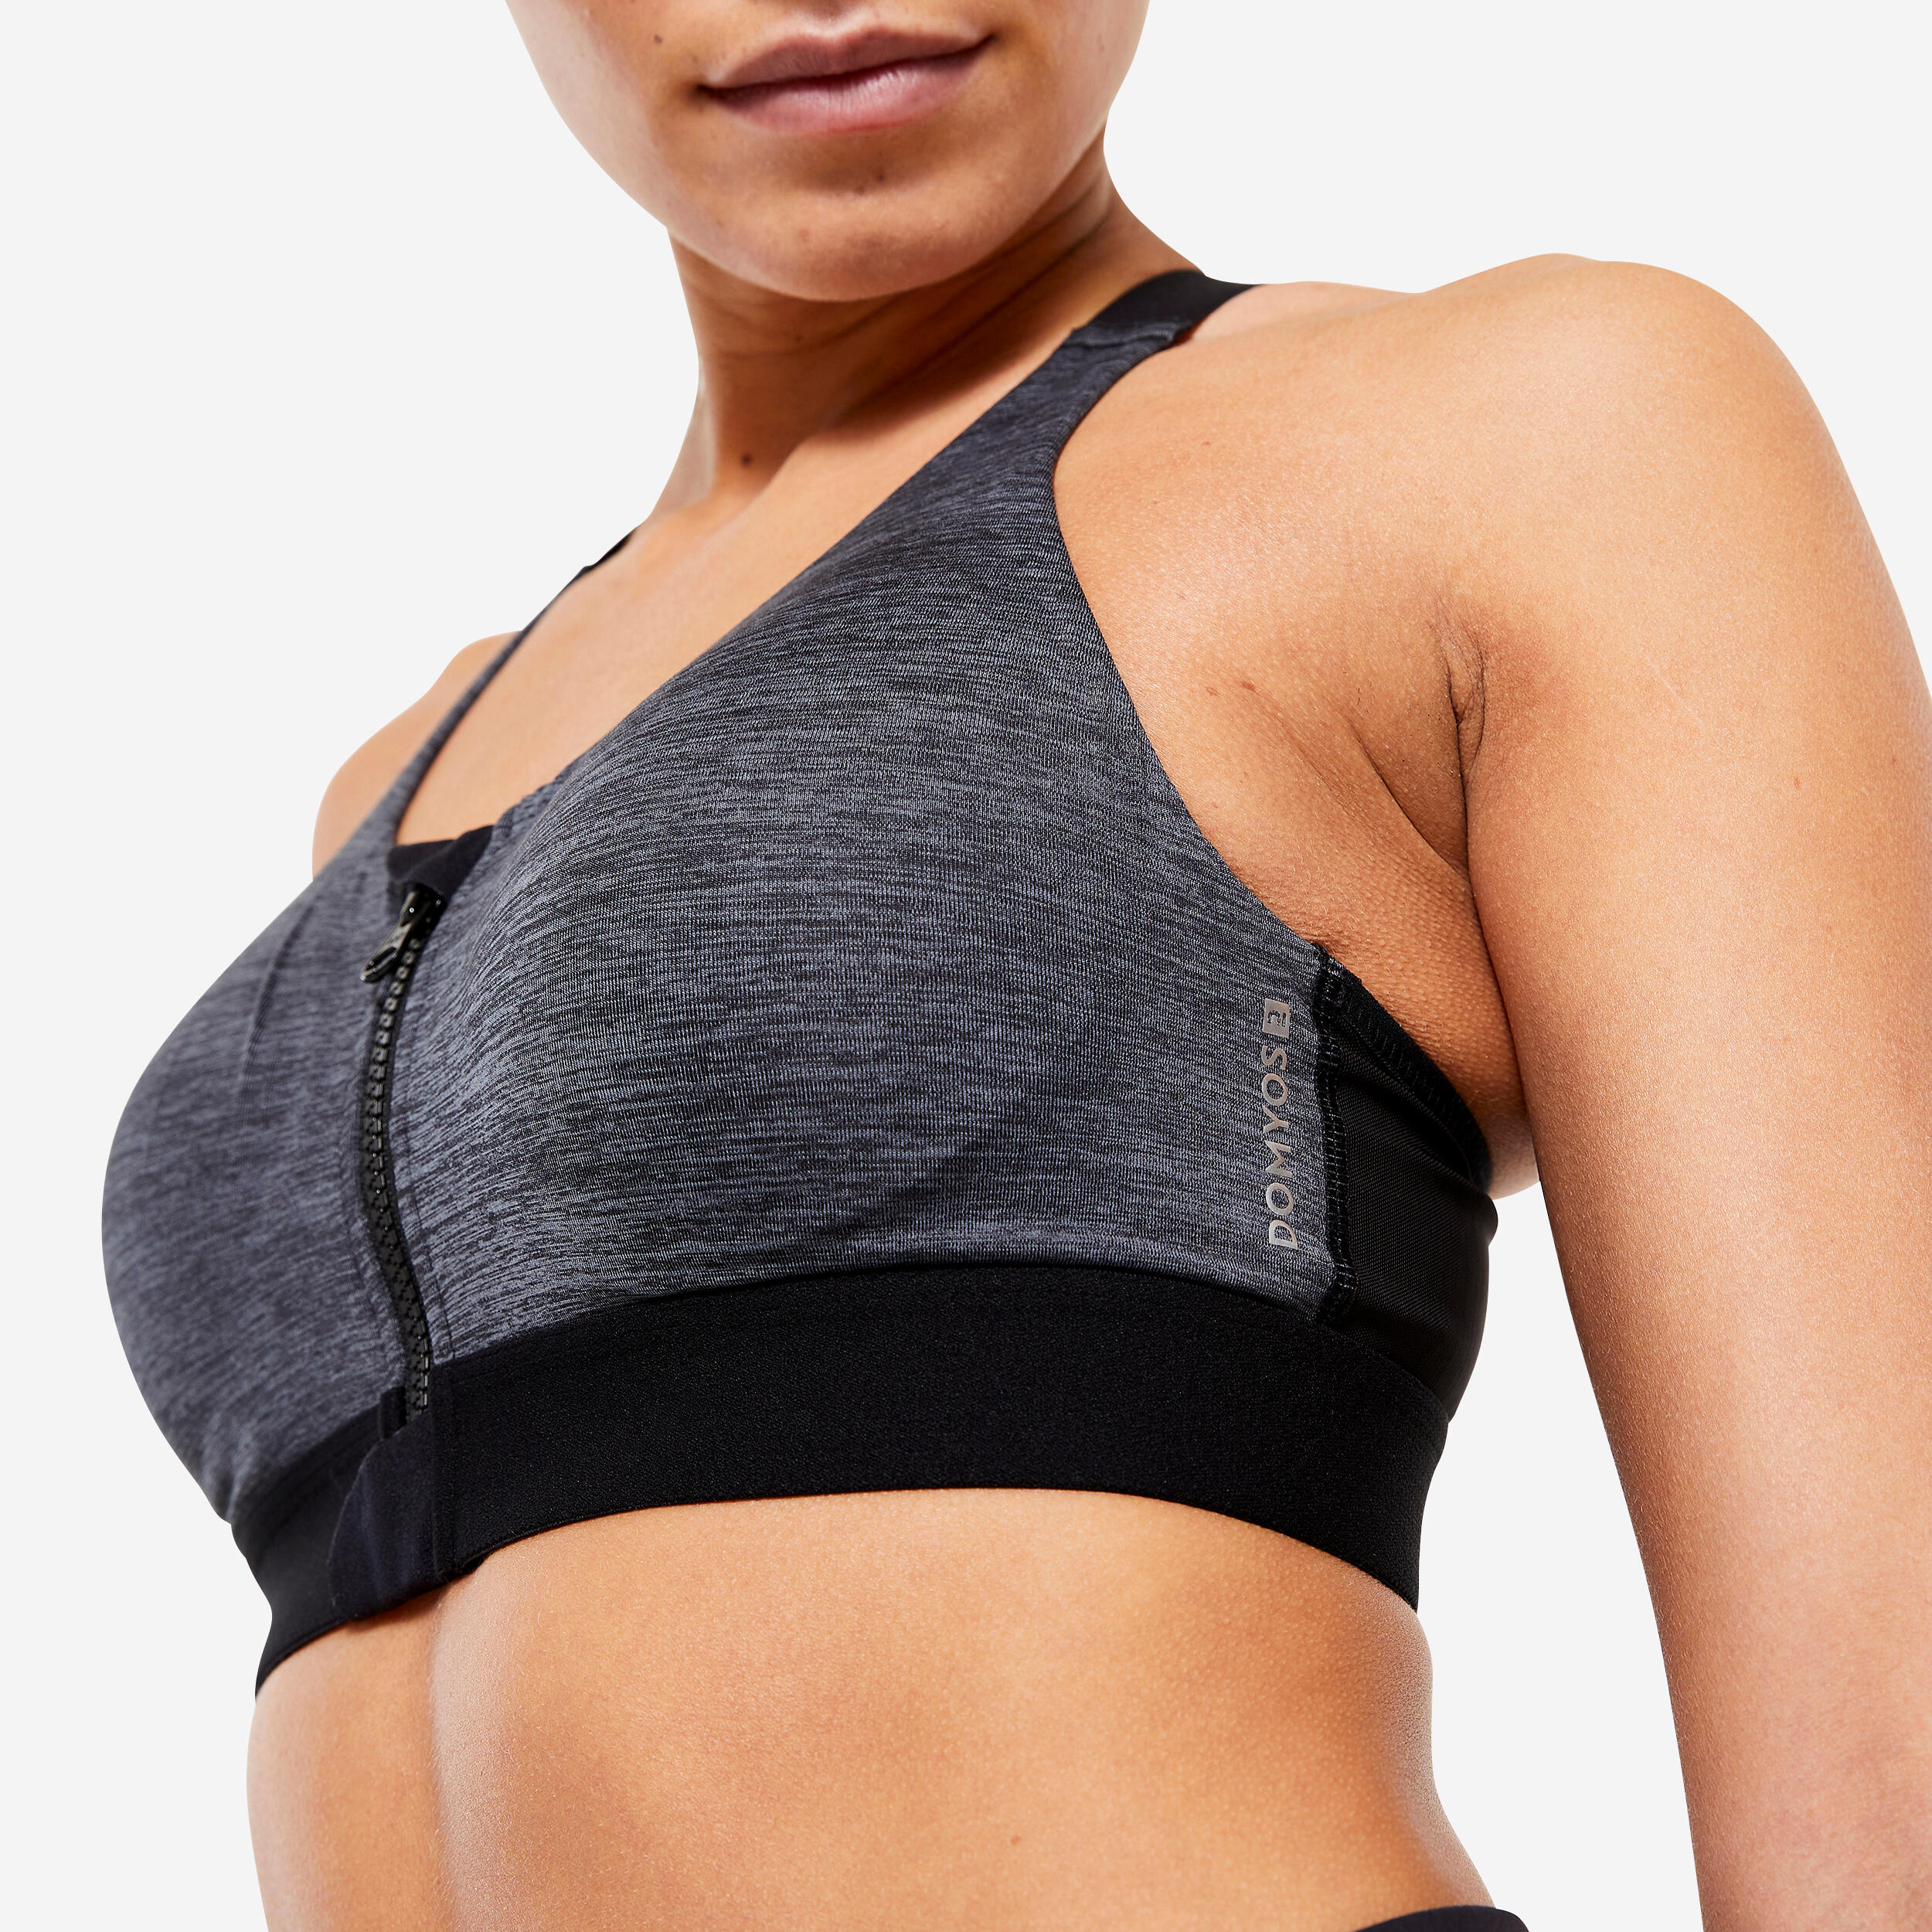 Women's High Support Zip-Up Sports Bra with Cups - Black/Grey 3/6